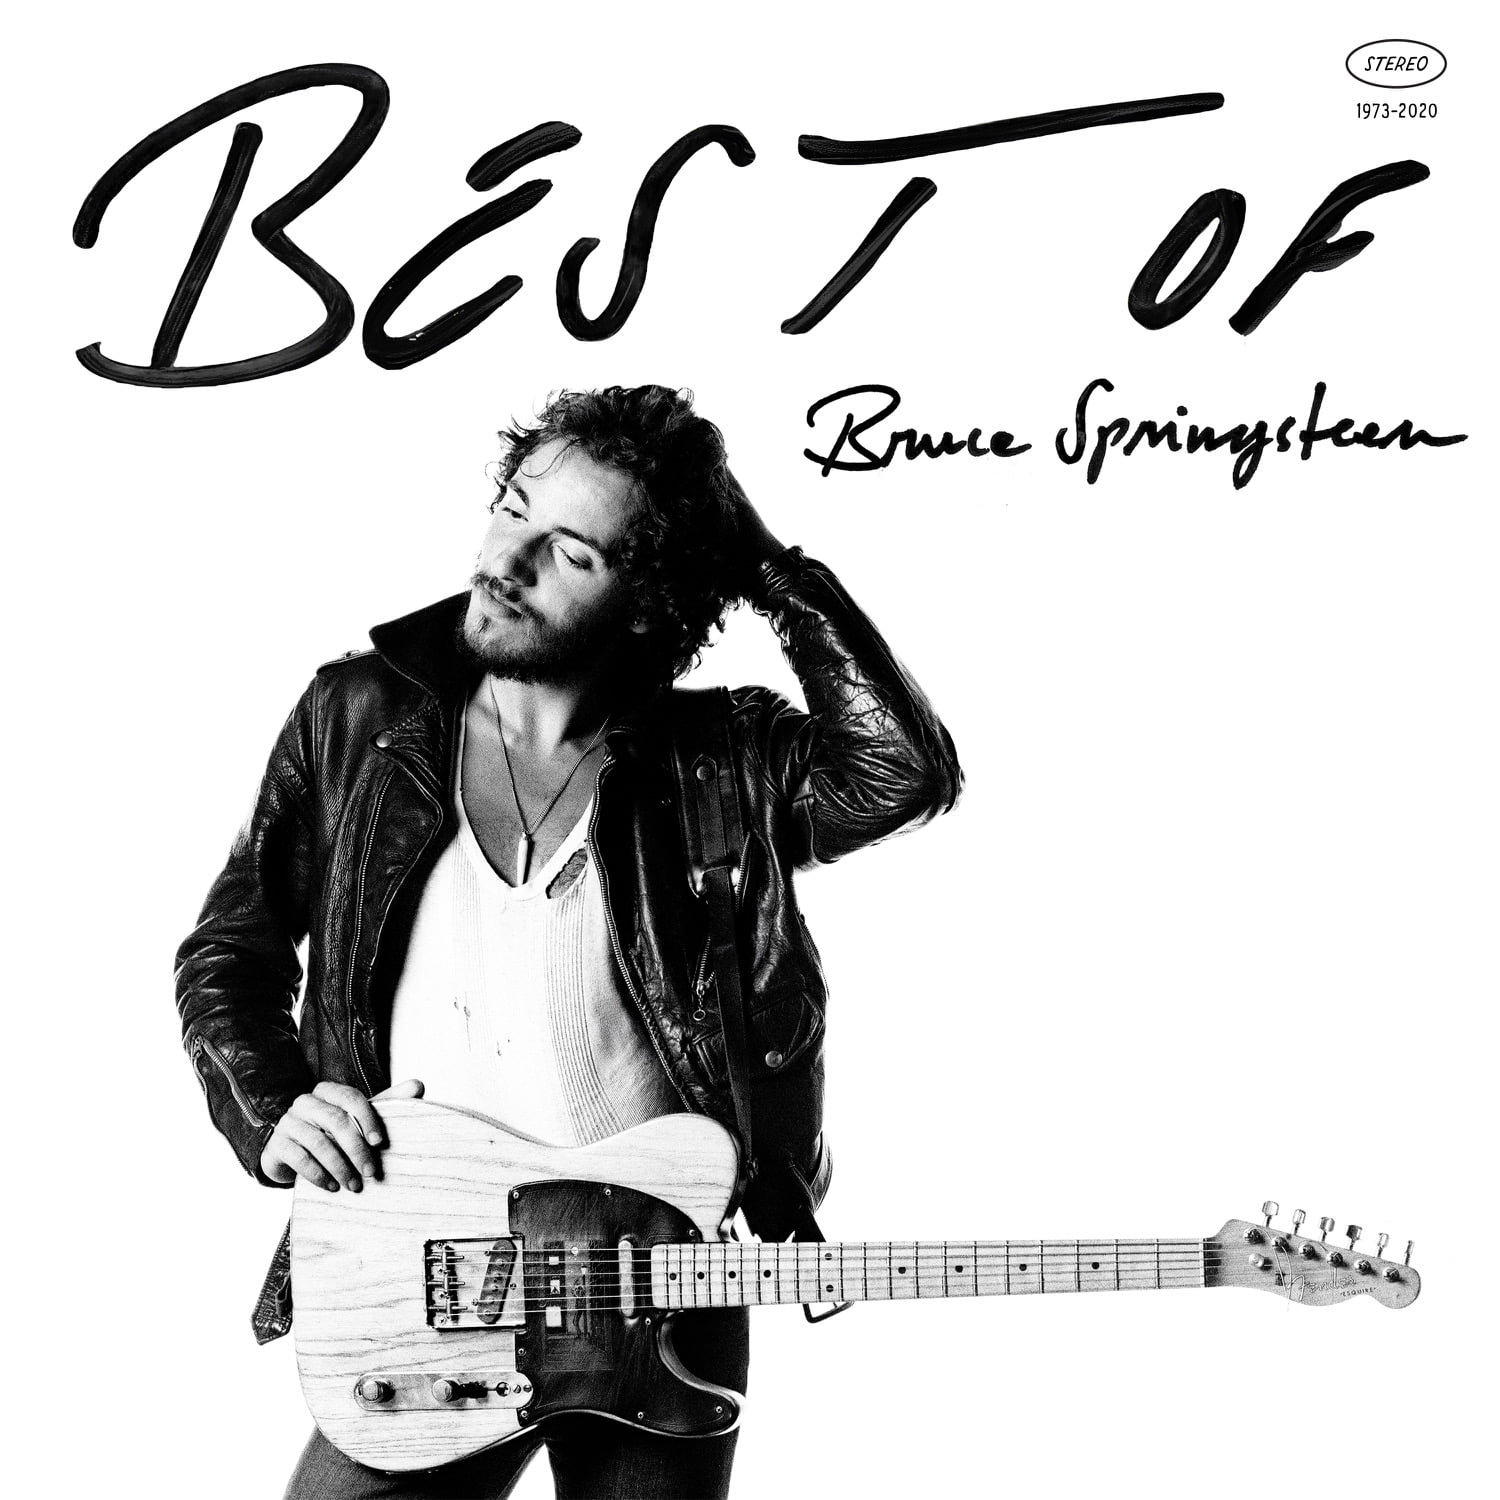 Bruce Springsteen Gets New Collection With Best Of Bruce Springsteen